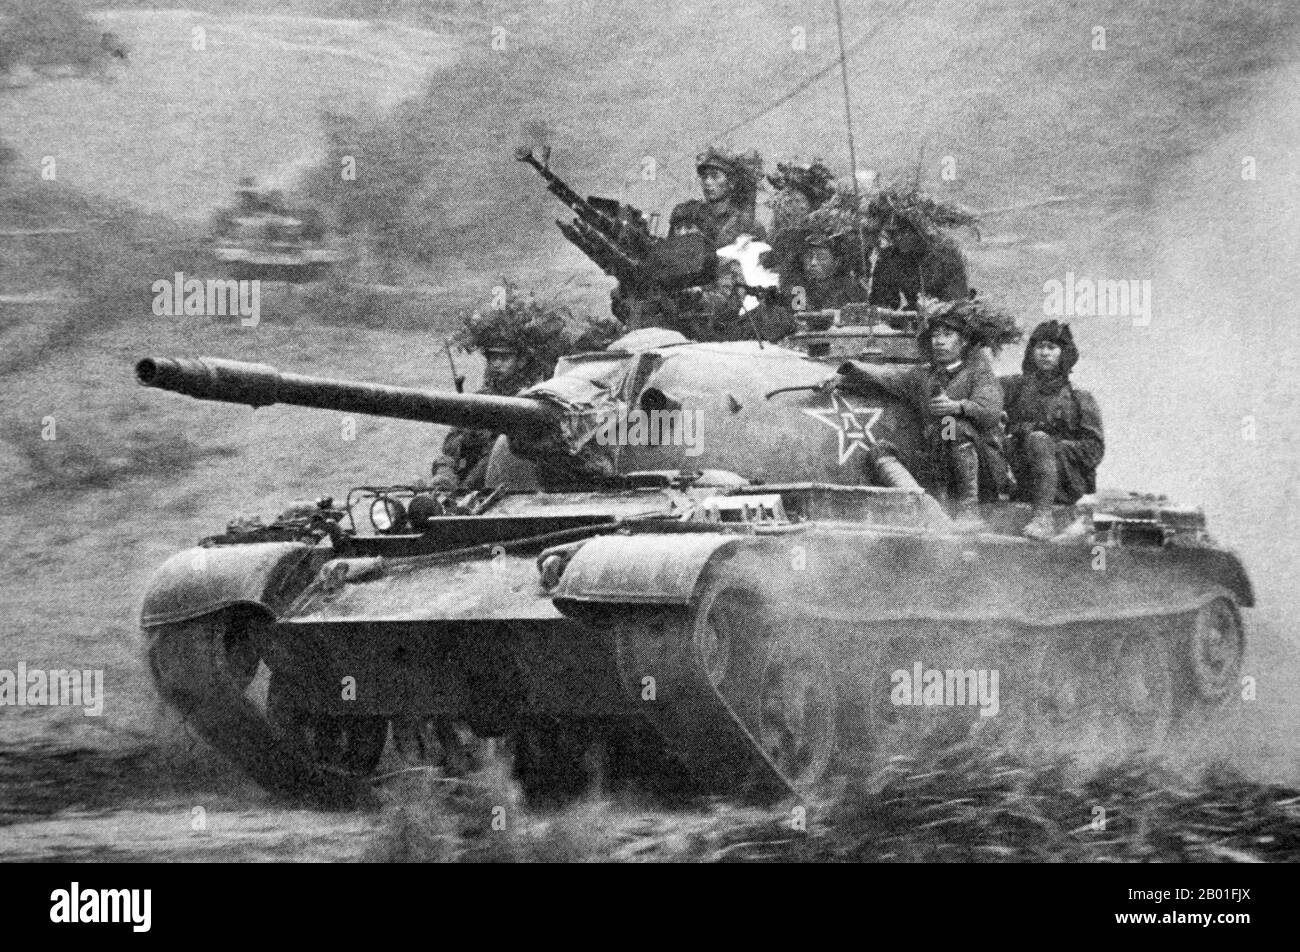 Vietnam: Chinese PLA tank near Lang Son, Third Indochina War, 1979.  The Sino-Vietnamese War (Vietnamese: Chiến tranh biên giới Việt-Trung), also known as the Third Indochina War, known in the PRC as 对越自卫反击战 (Counterattack against Vietnam in Self-Defense) and in Vietnam as Chiến tranh chống bành trướng Trung Hoa (War against Chinese expansionism), was a brief but bloody border war fought in 1979 between the People's Republic of China (PRC) and the Socialist Republic of Vietnam.  The PRC launched the offensive in response to Vietnam's 1978 invasion and occupation of Cambodia. Stock Photo